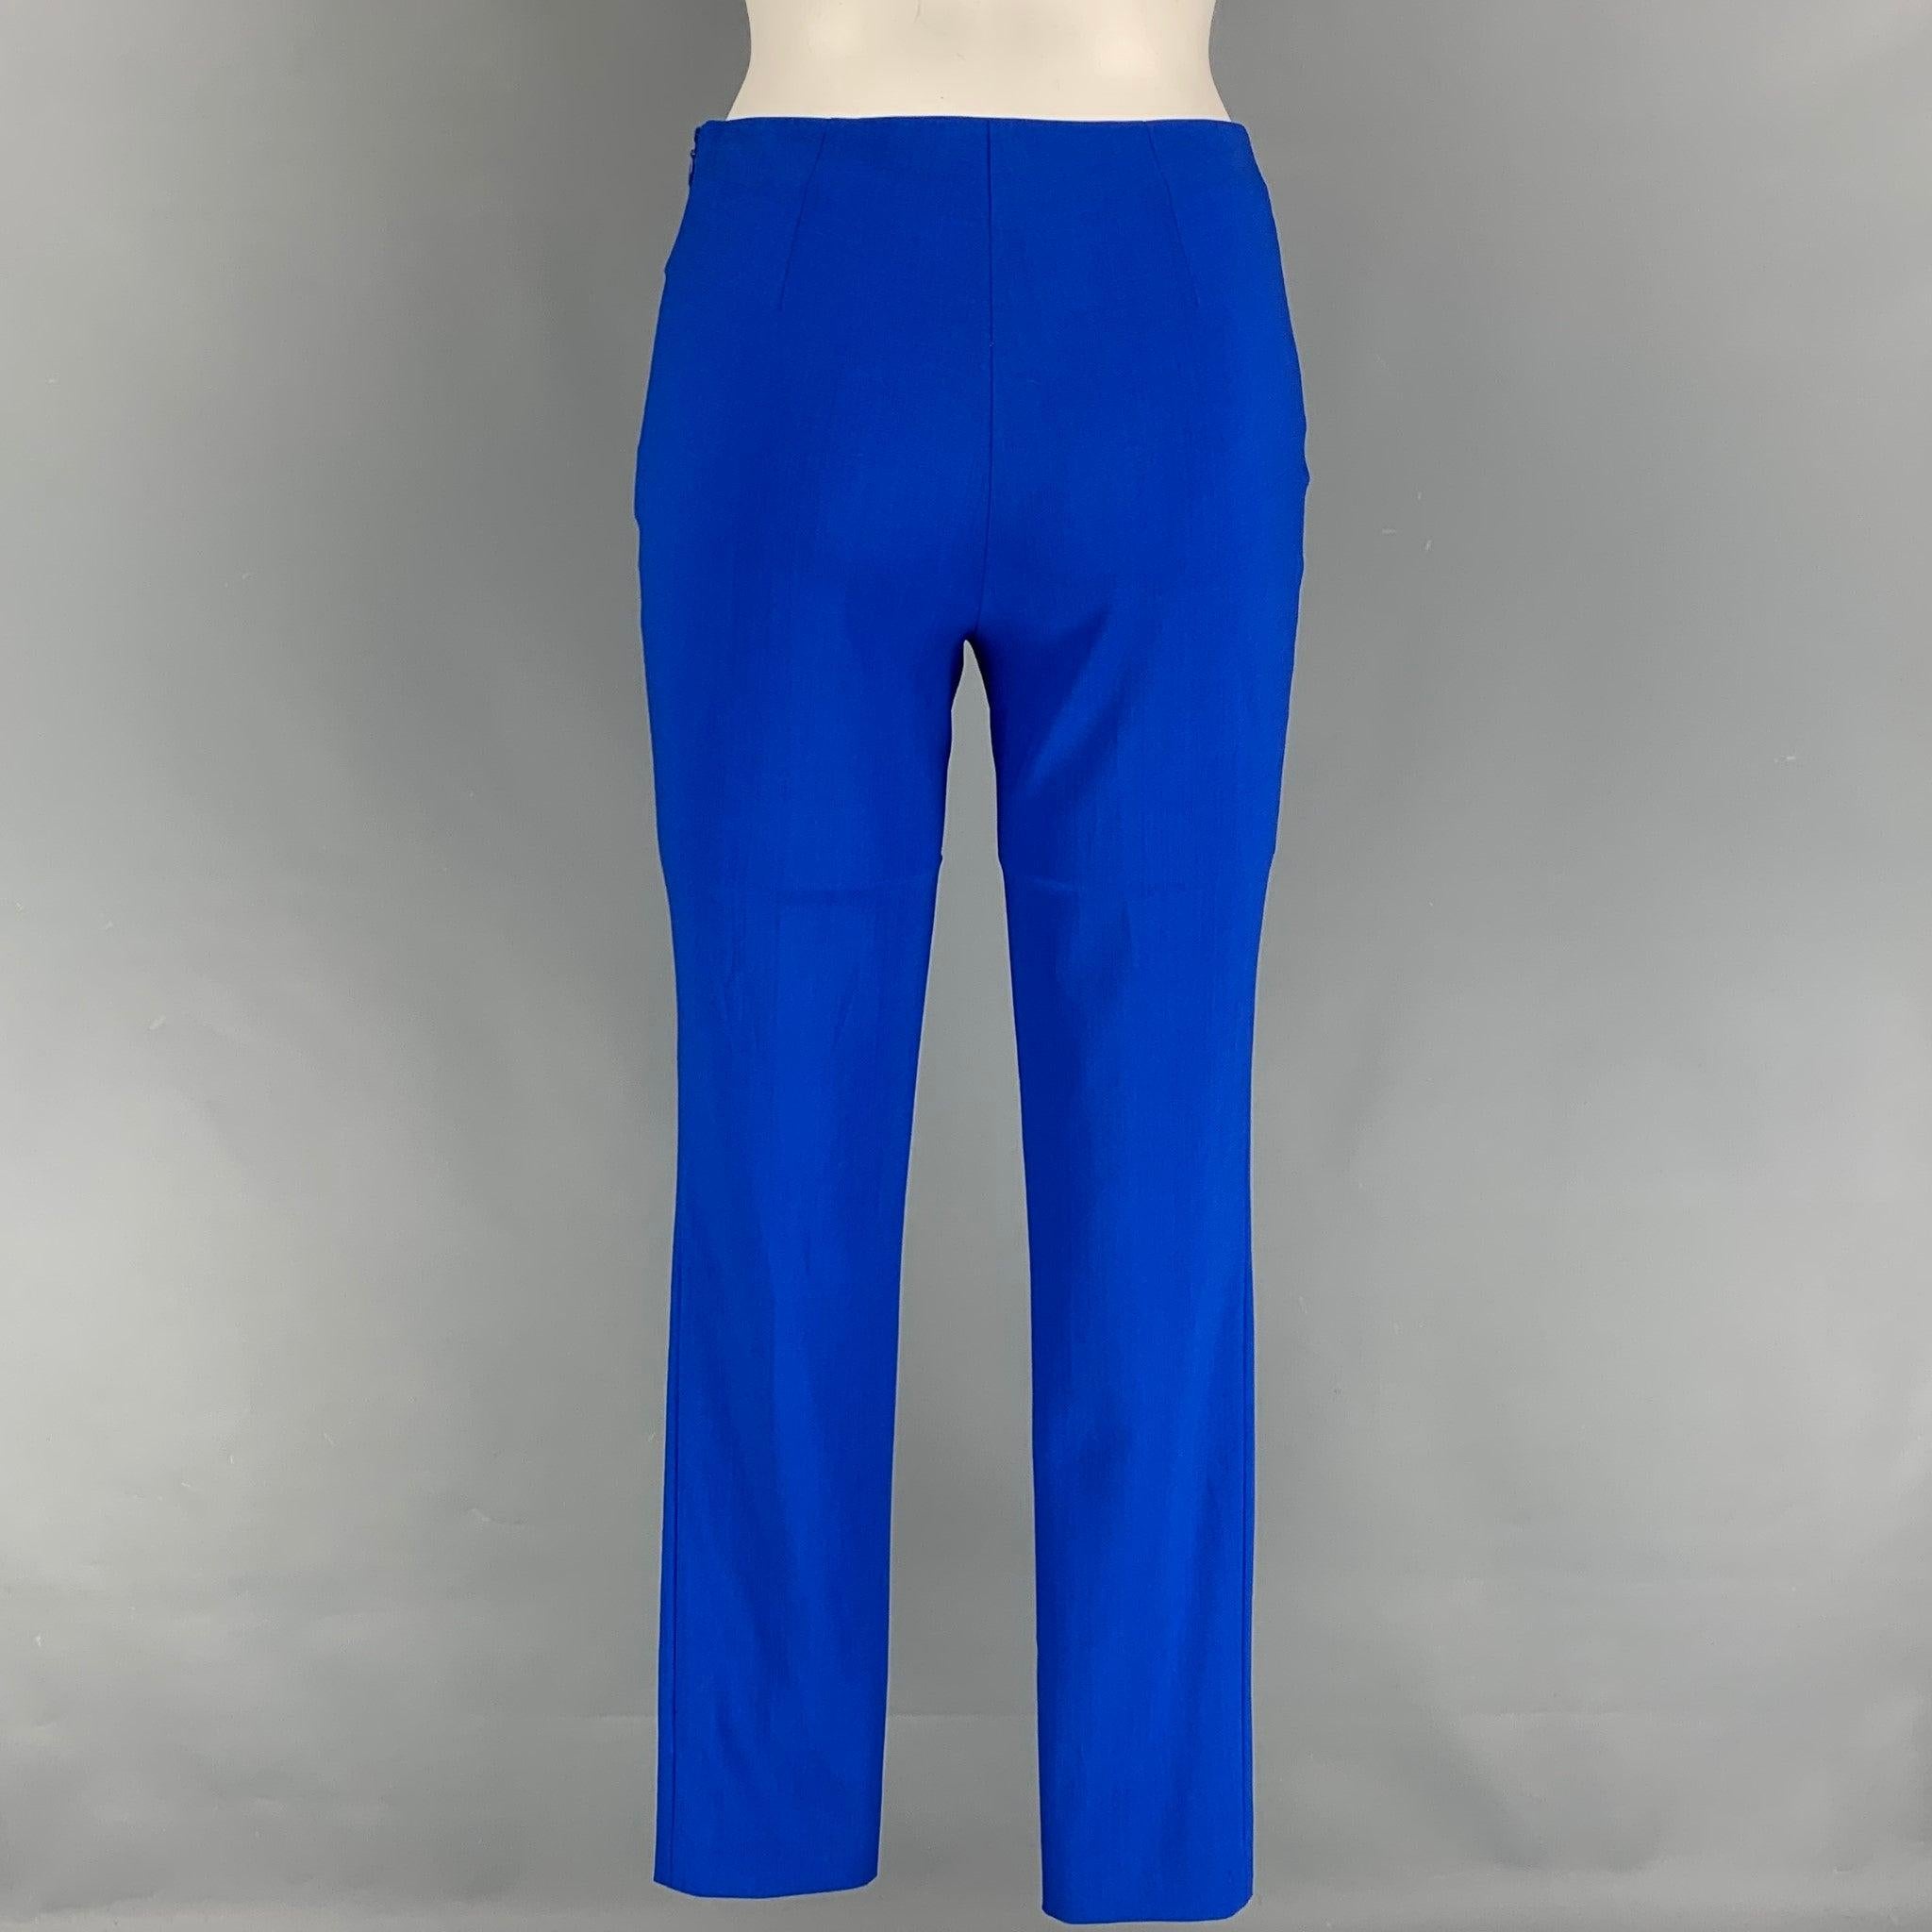 LA PERLA dress pants comes in a cobalt virgin wool featuring a skinny fit, zipped legs, and a side zipper closure. Made in Italy.
New With Tags. 

Marked:   IT 38 / FR 34 / DE 32 

Measurements: 
  Waist: 30 inches  Rise: 10 inches  Inseam: 30.5